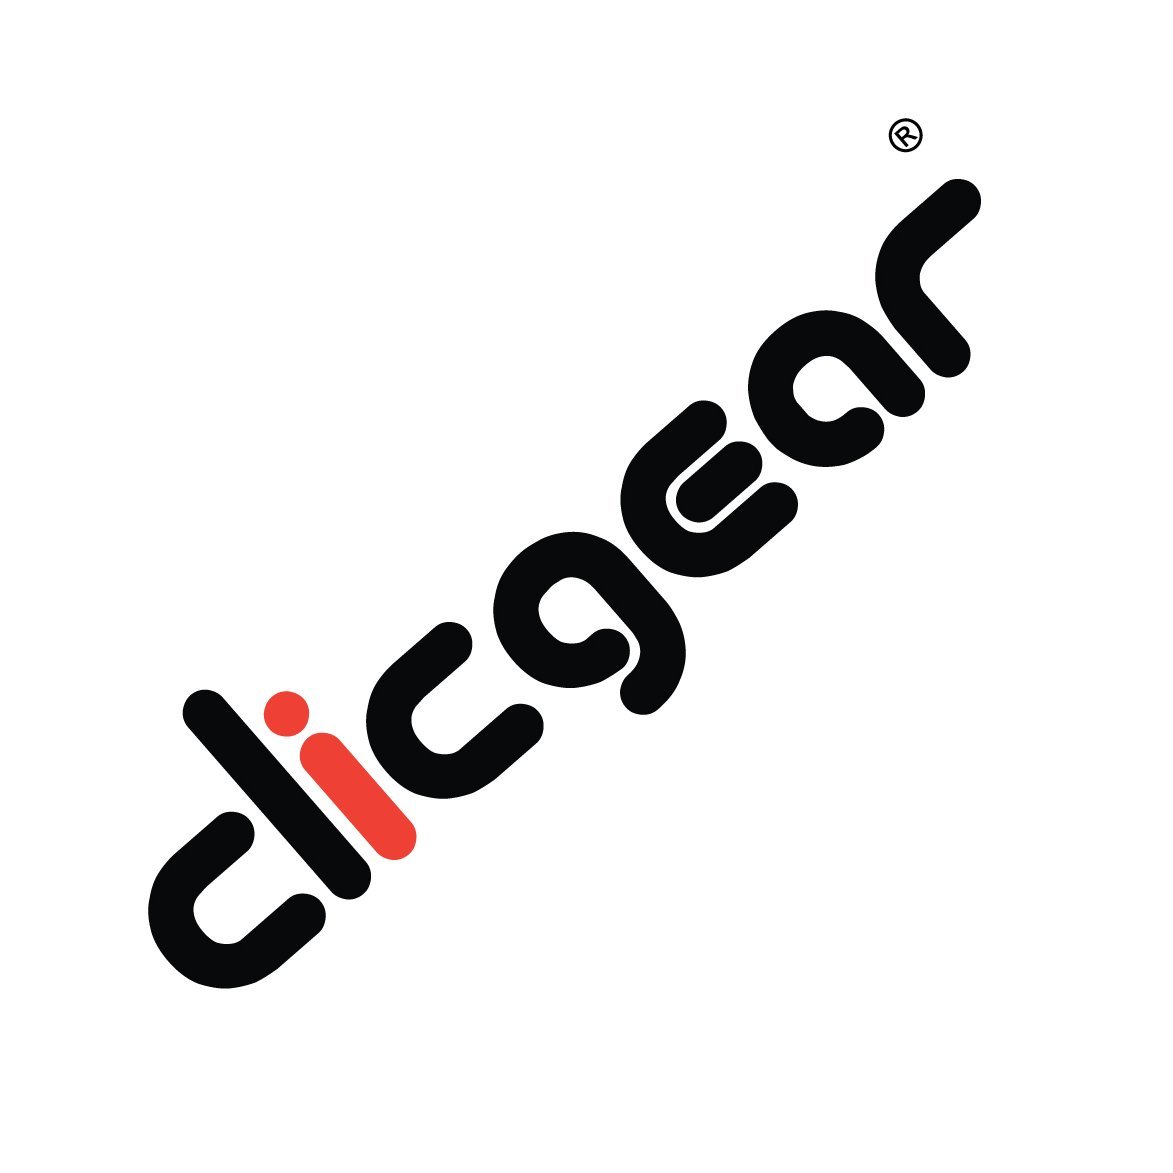 We are Clicgear Industrial Design Ltd. the designers and manufacturers of all that is Clicgear. #Golf #Pushcart #clicgear #1cartnotontour #pushcartmafia